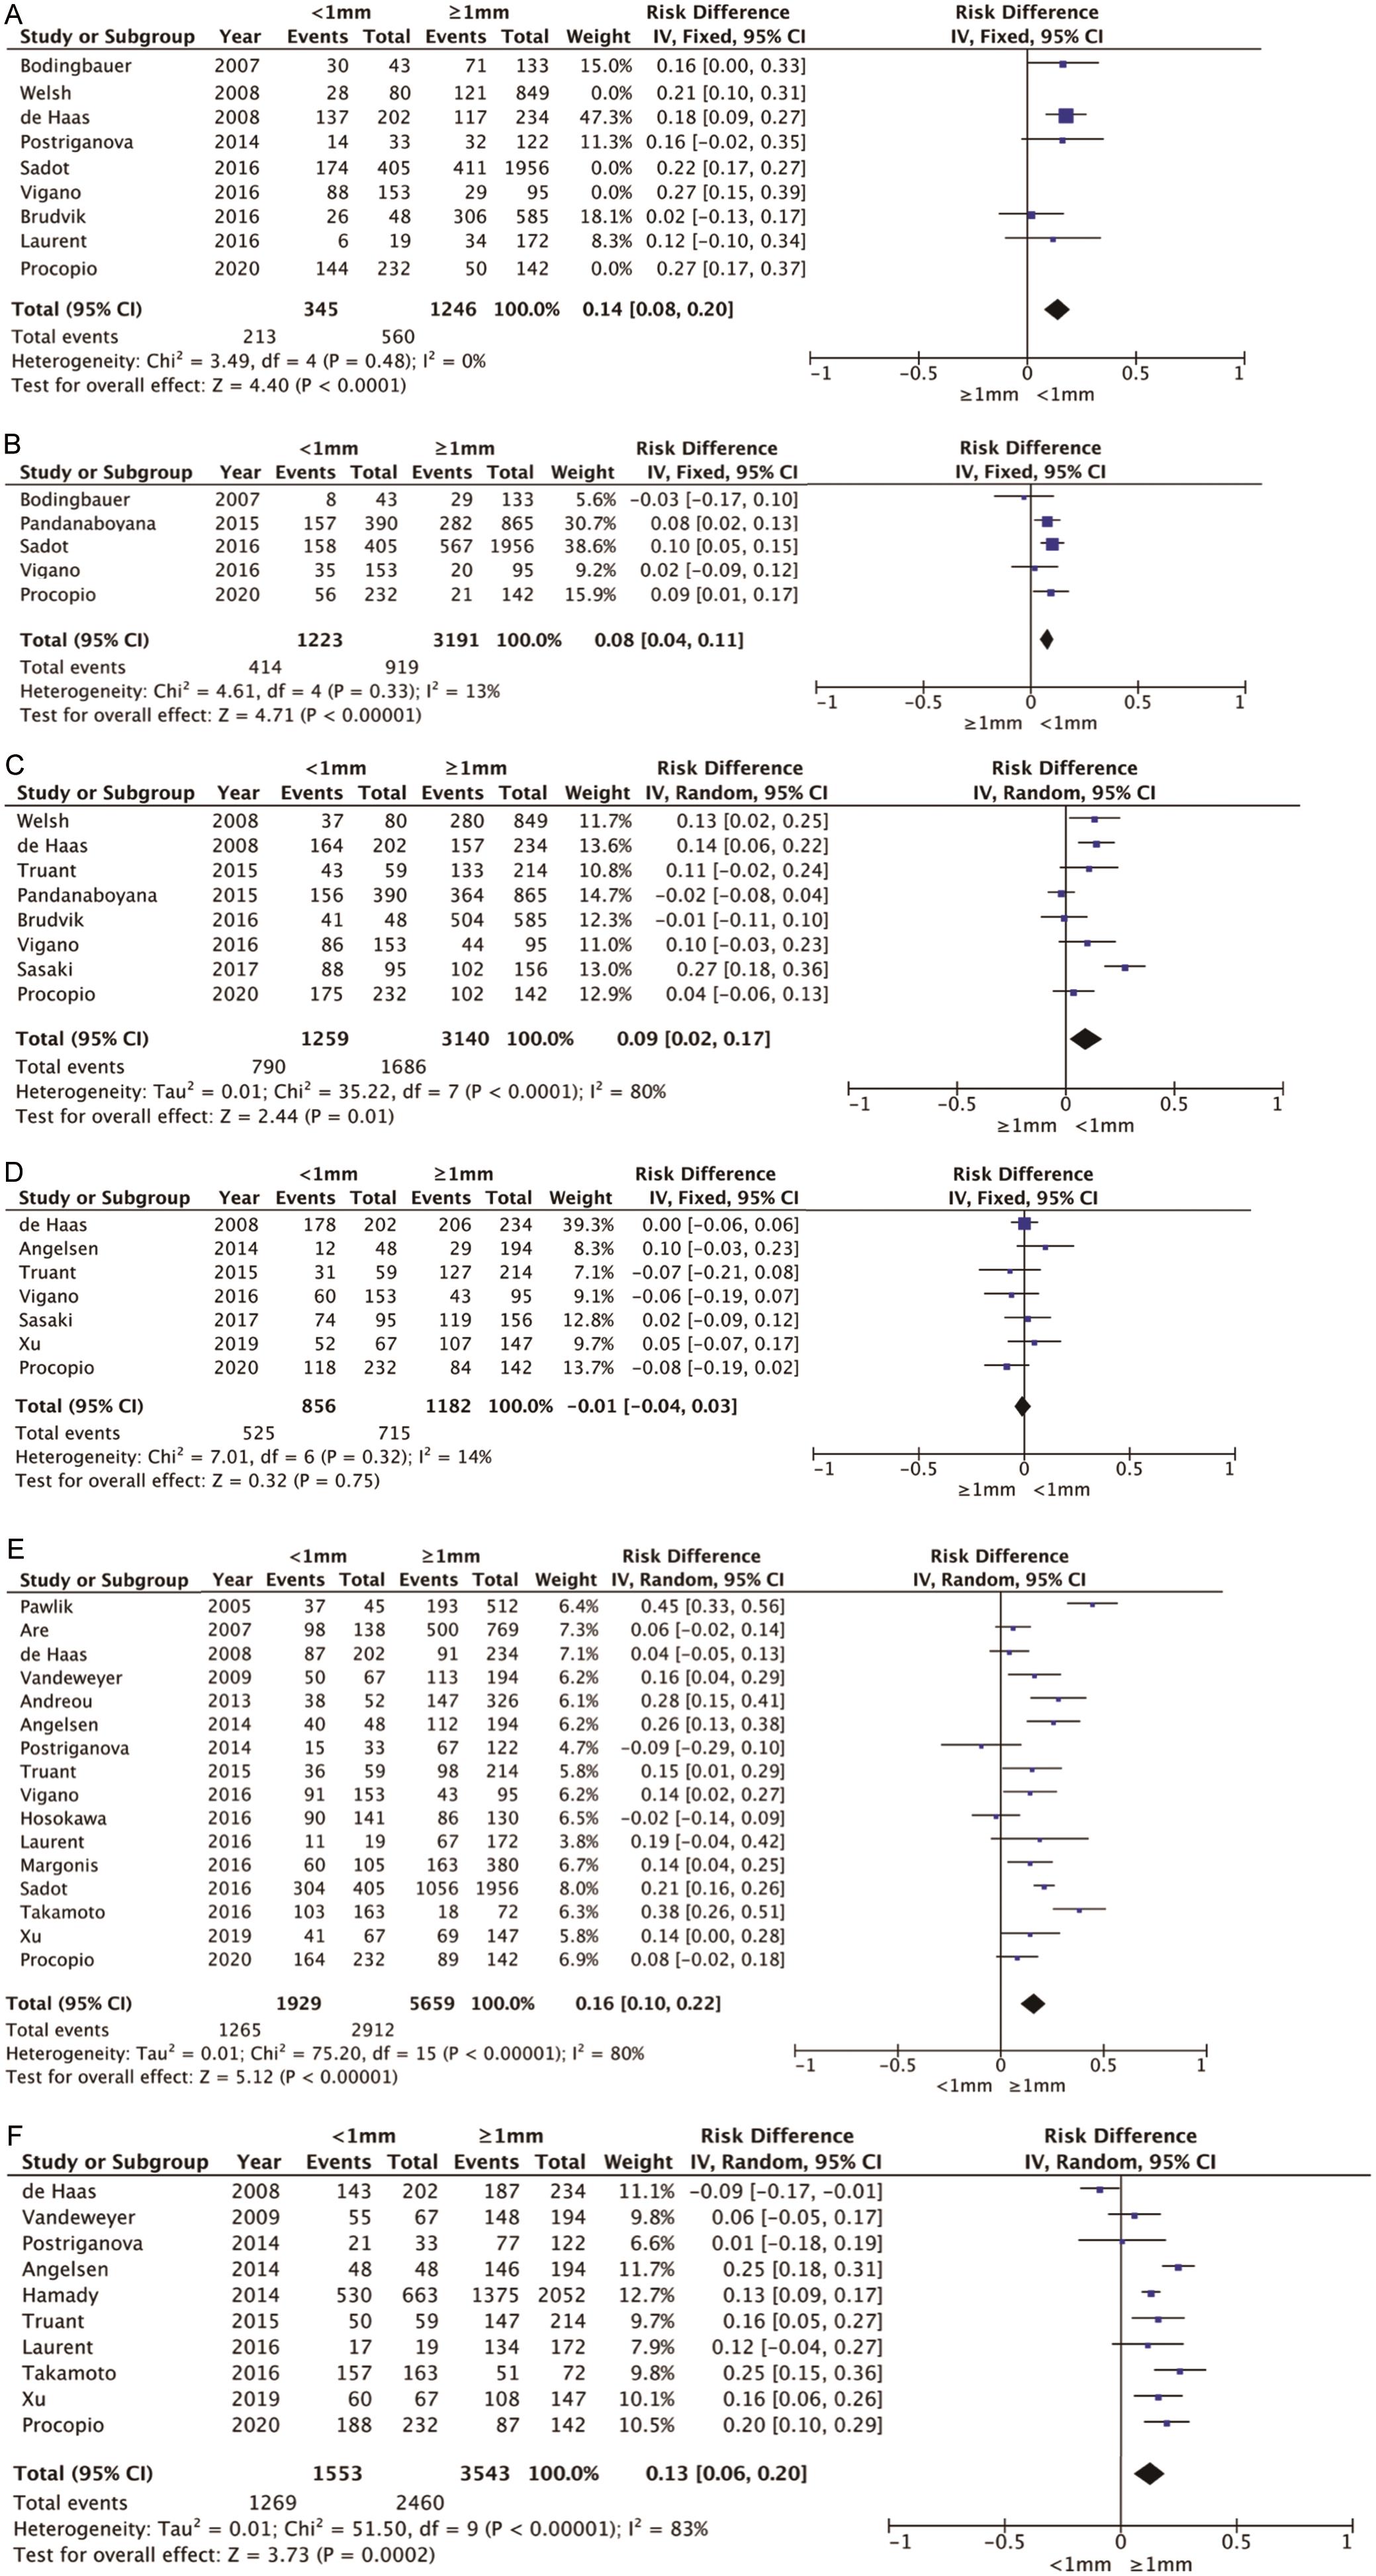 Meta-analysis of studies evaluating the prognostic impact of a surgical margin width ≥1 mm in hepatectomy for colorectal liver metastasis.